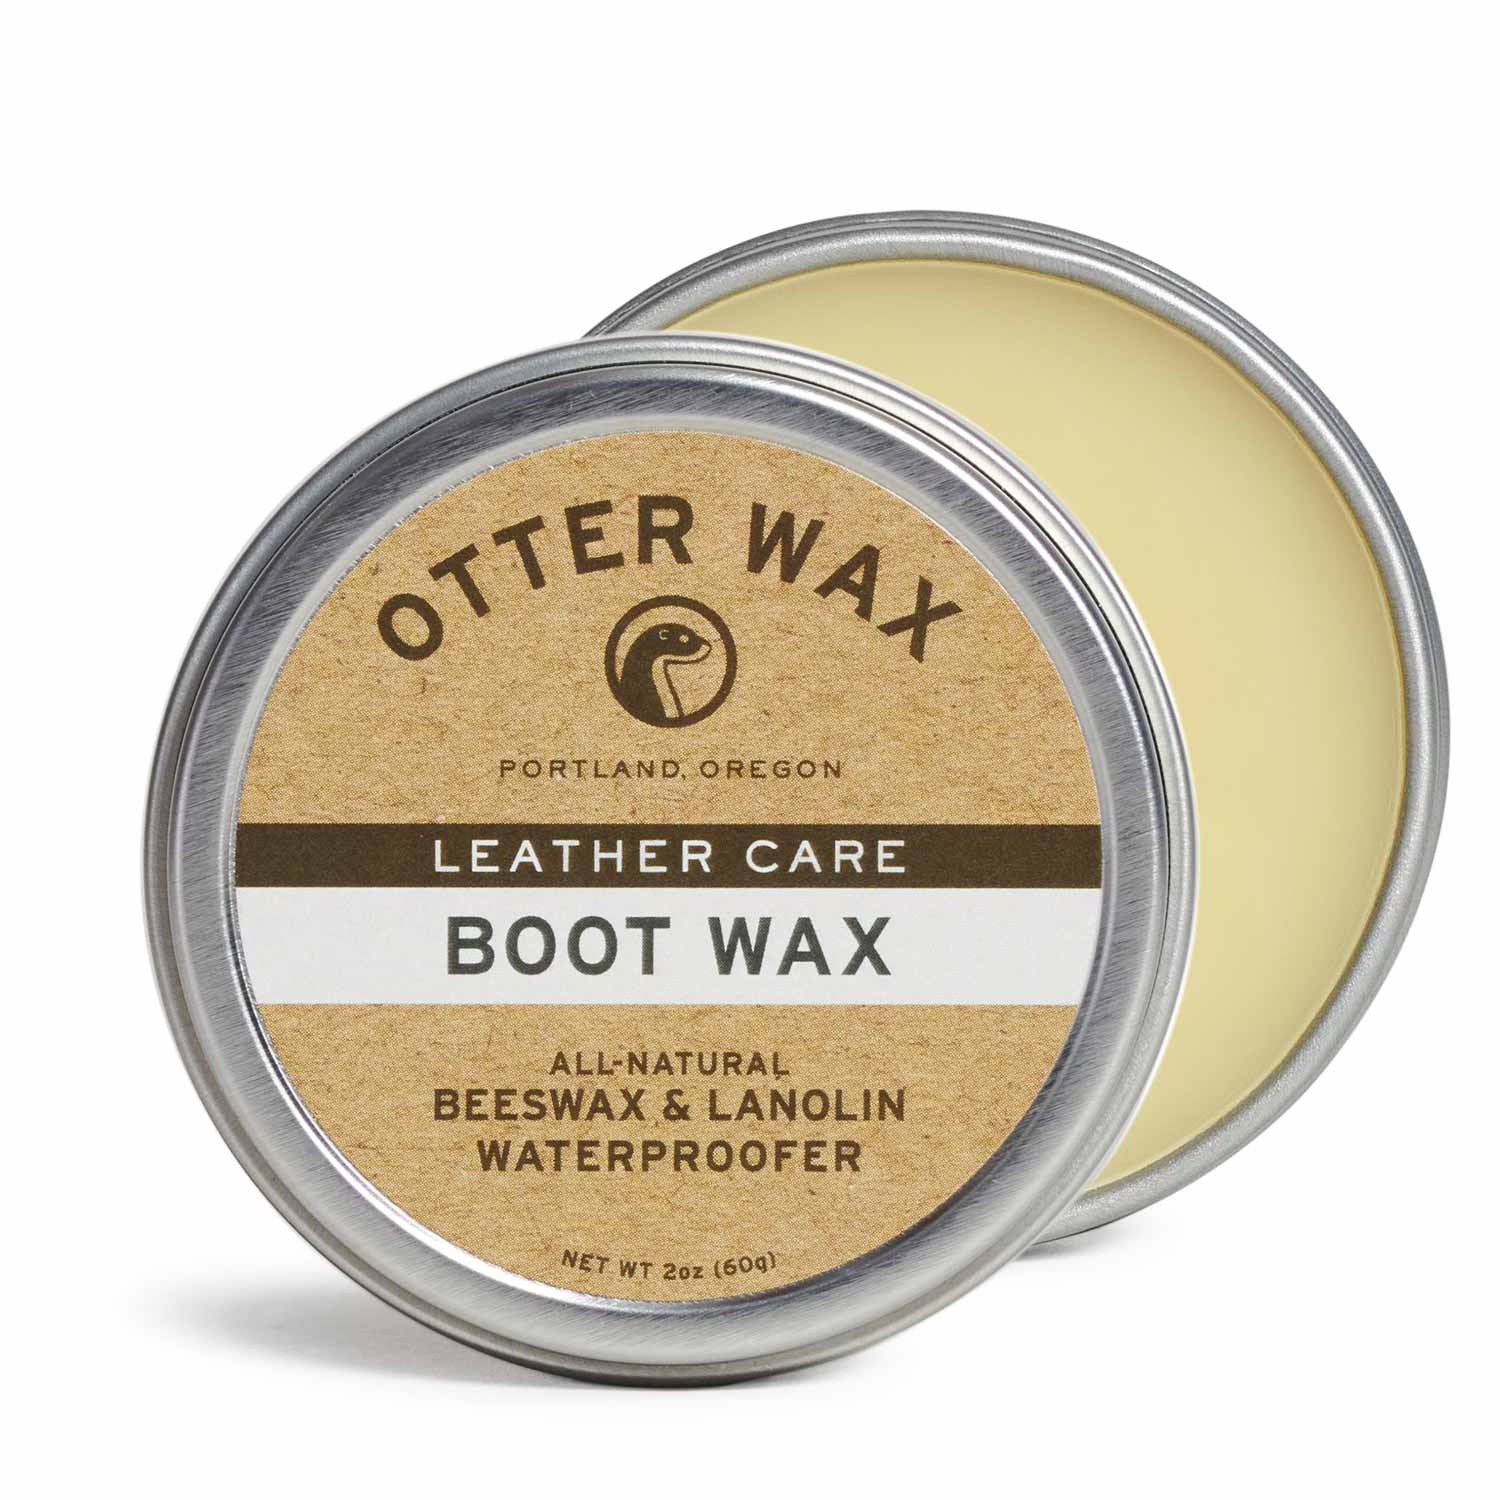 Blended Waxes Leather Waterproofing Wax - Leather Care Wax for Boots,  Shoes, Gloves, Jackets, Belts, Bags, and Hats - Natural Weather Proofing  Wax (8